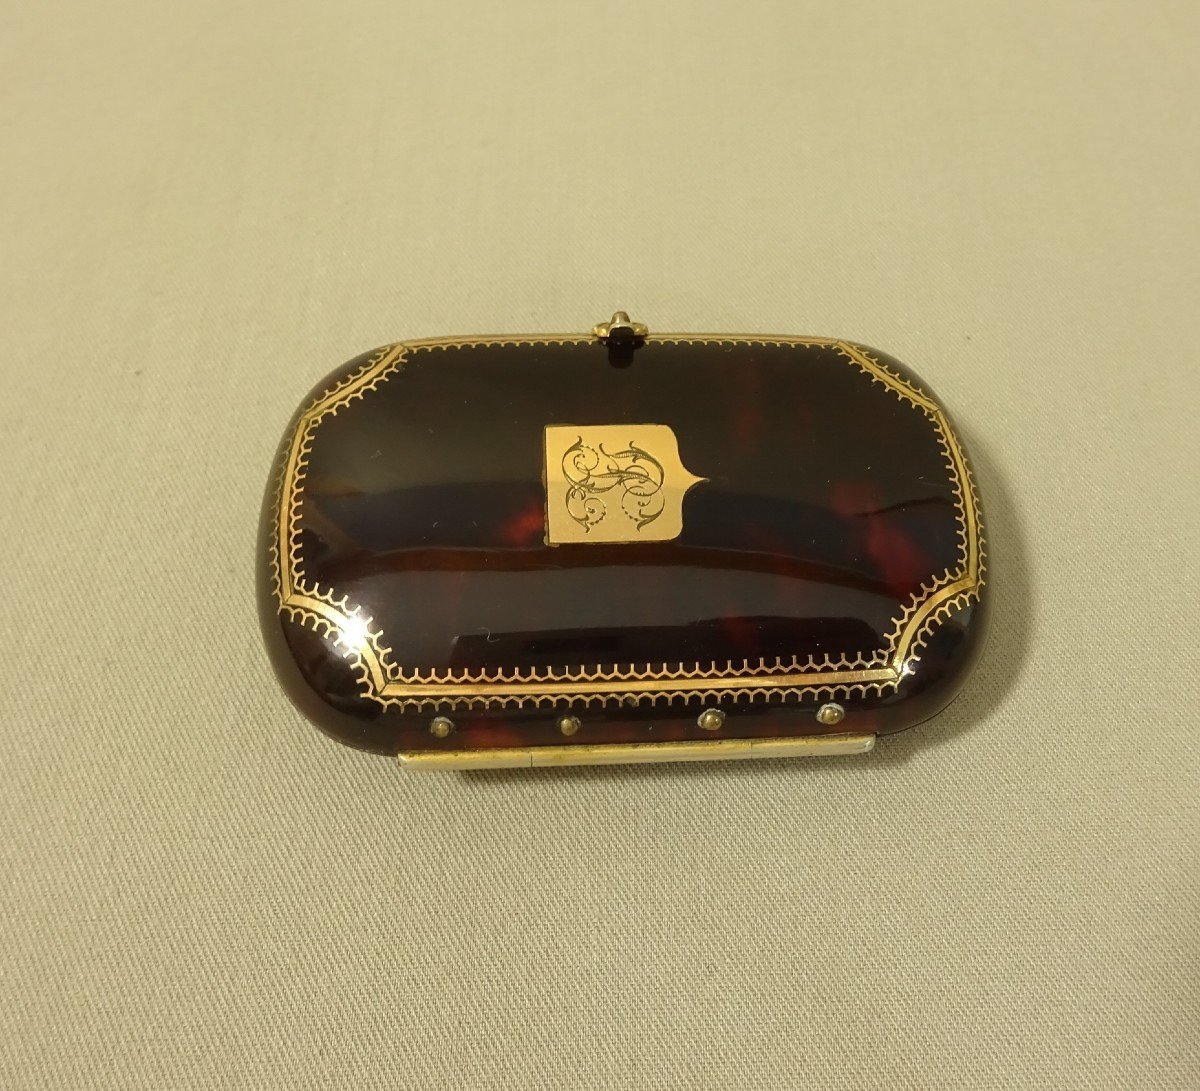 19th Century Tortoiseshell, Silver, Gold-inlaid Case With Interior Fabric Pockets-photo-3